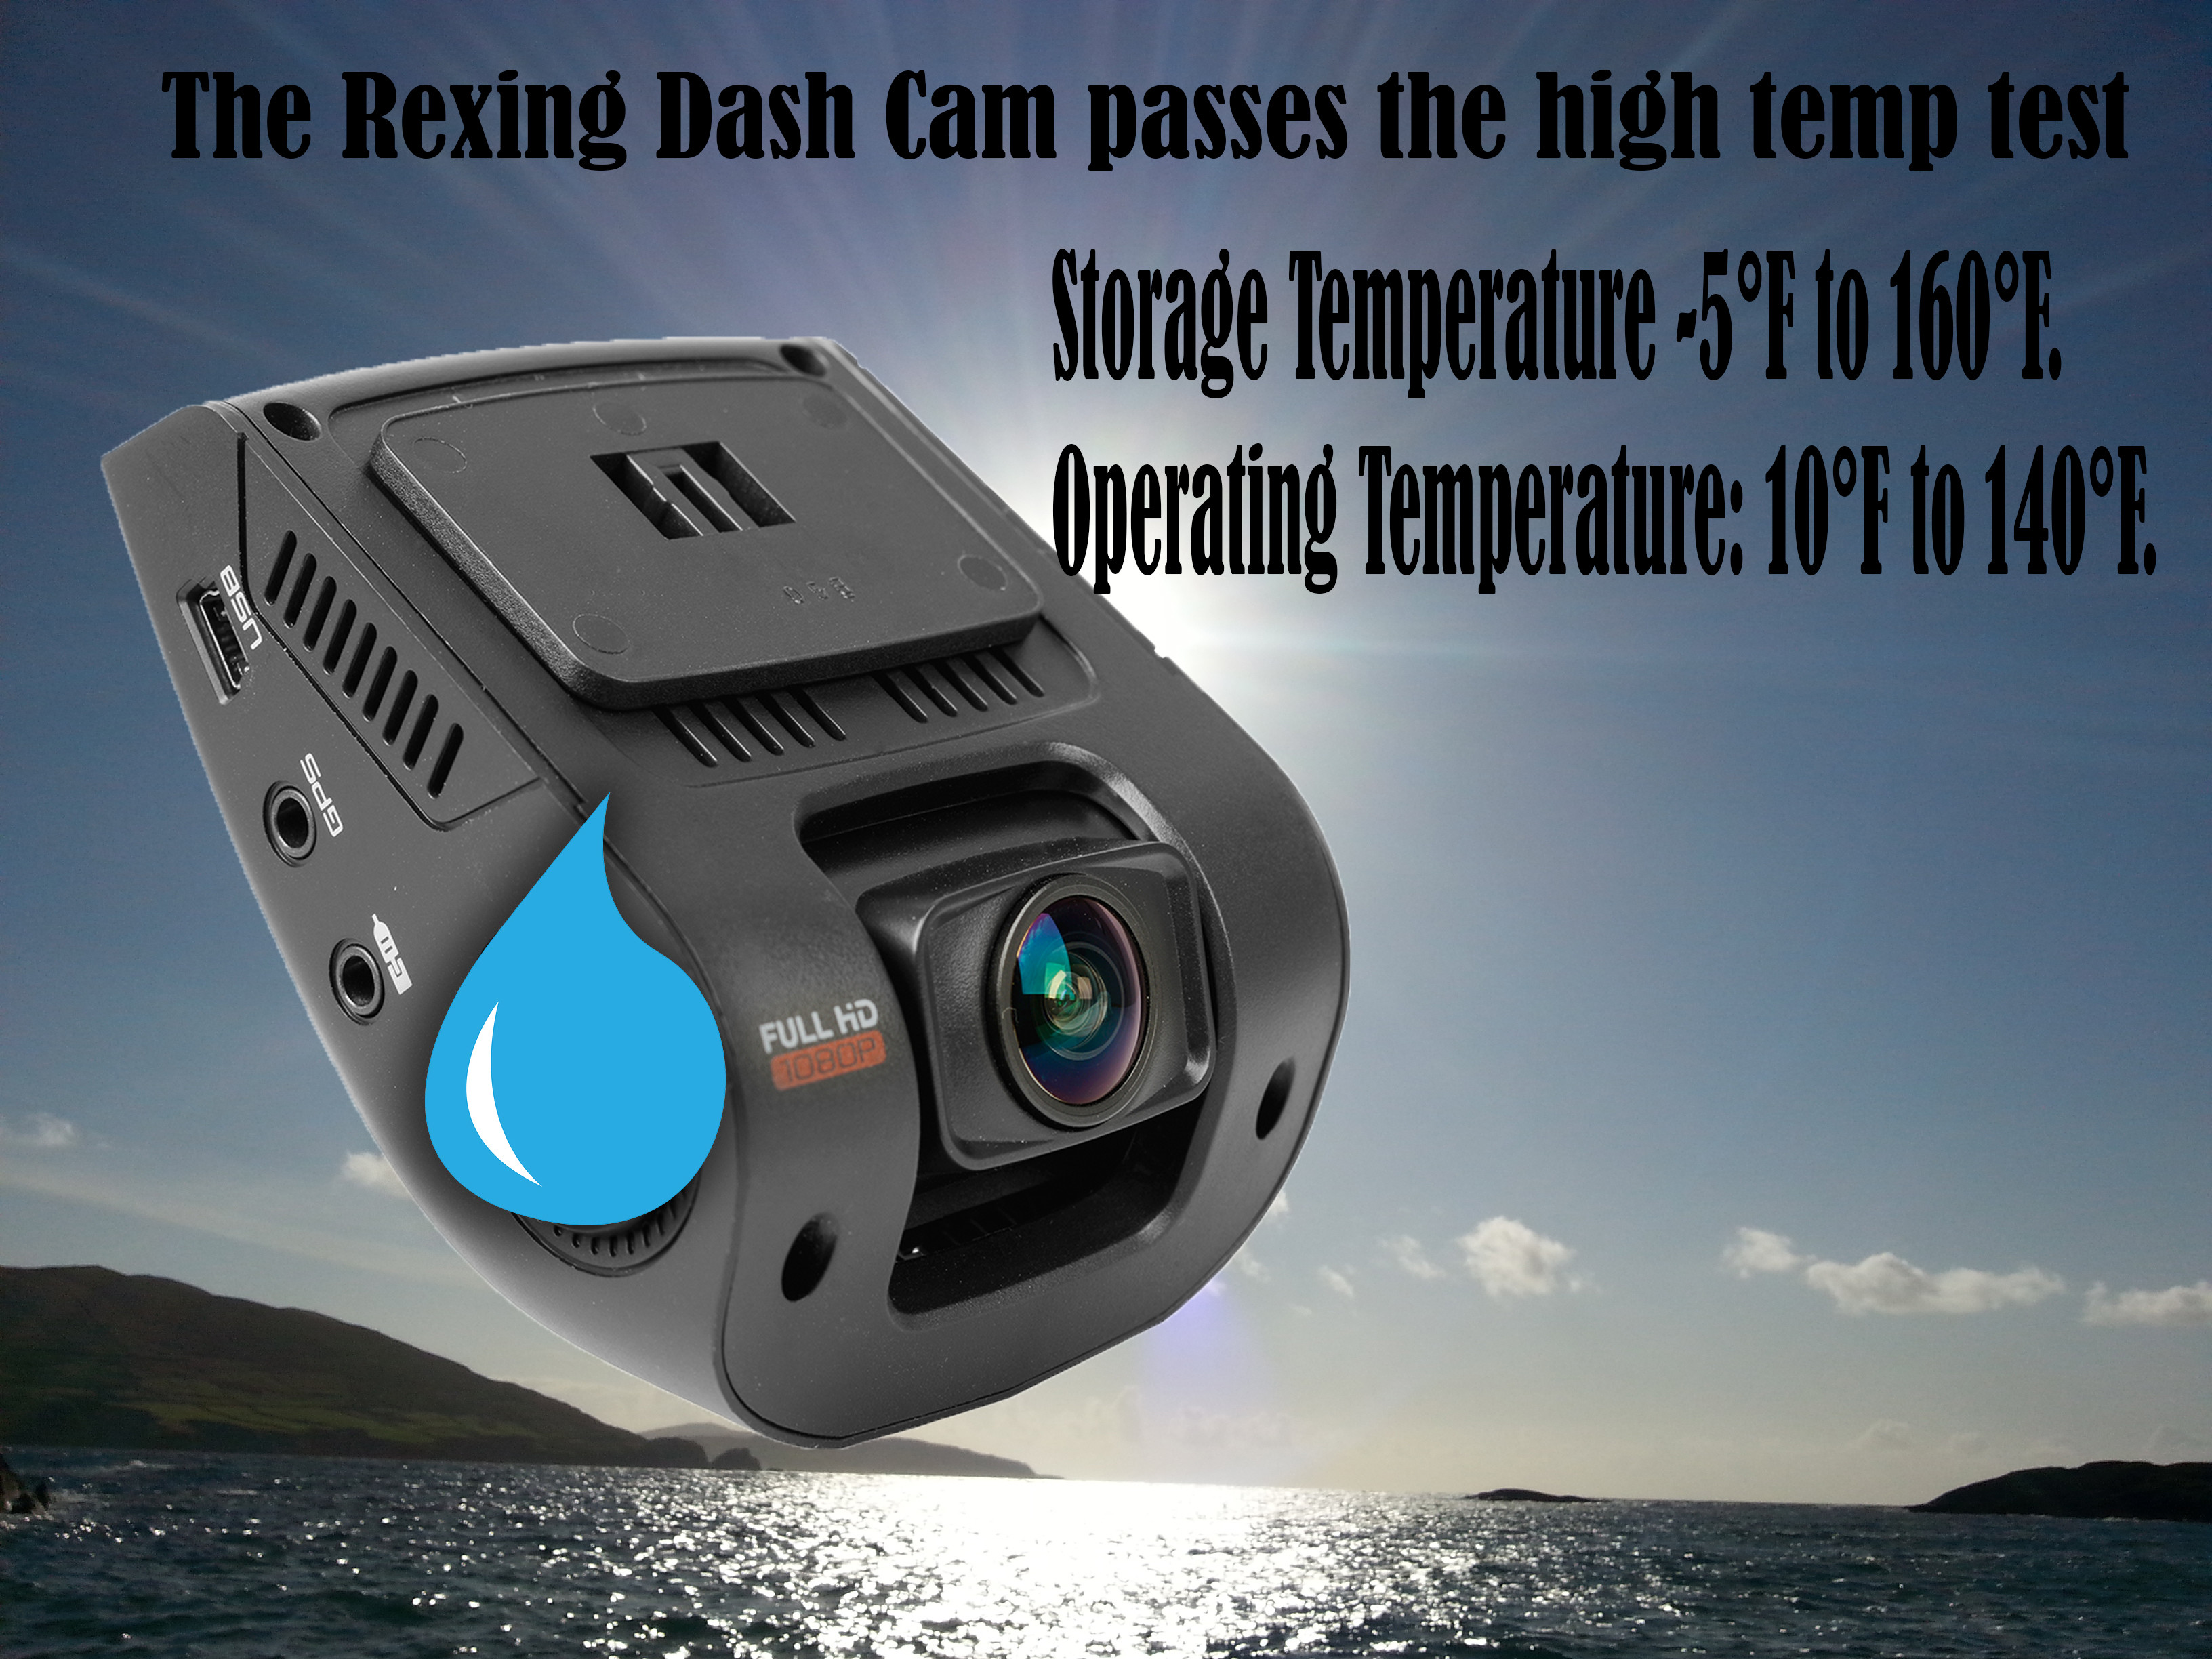 The Rexing Dash Cam passes The High Heat Test